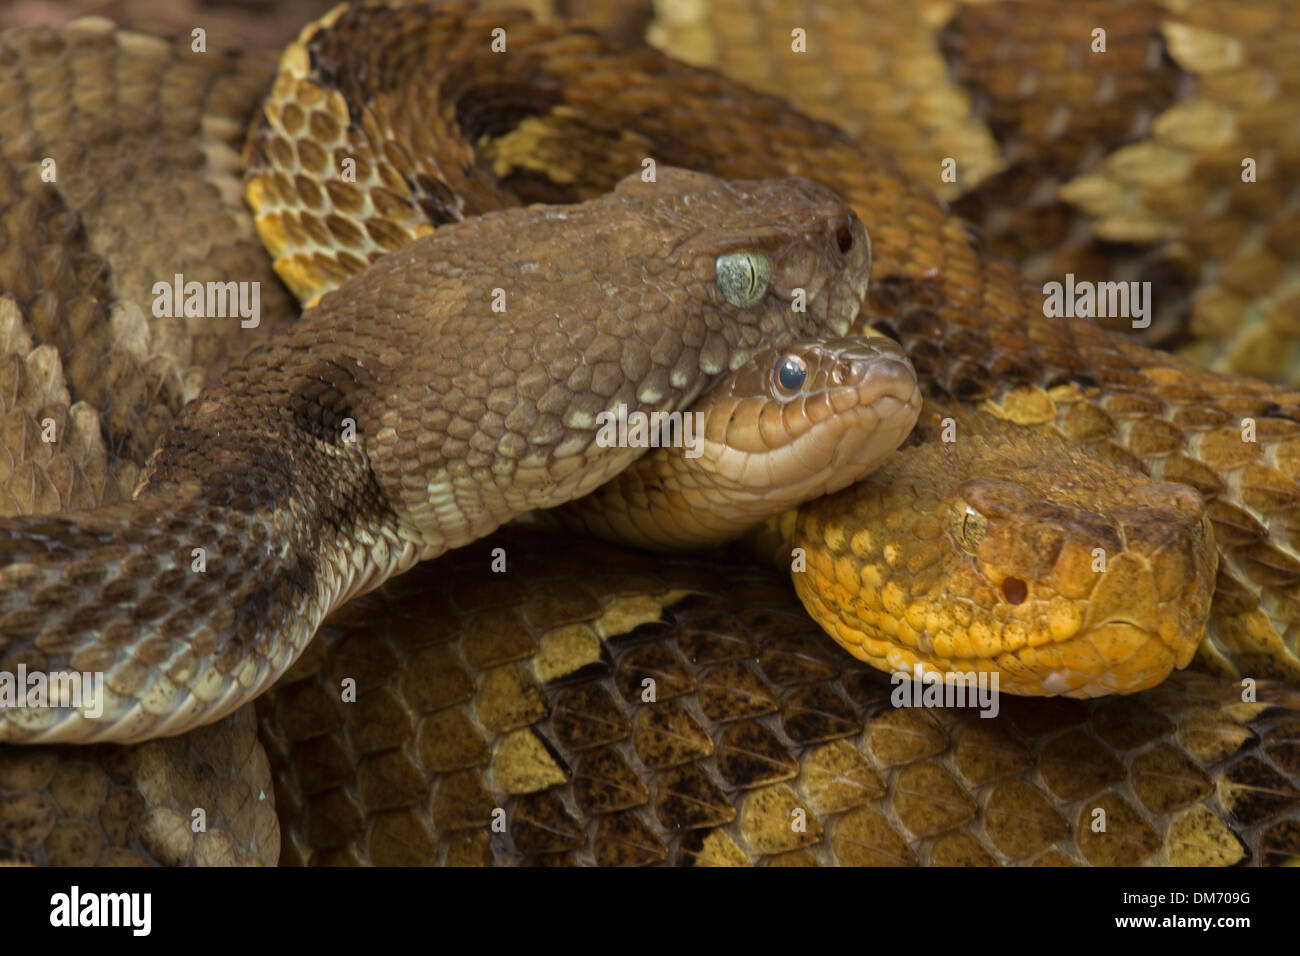 Timber rattlesnakes, Crotalus horridus, and common garter snake, Thamnophis sirtalis, gravid females gathered at rookery site Stock Photo